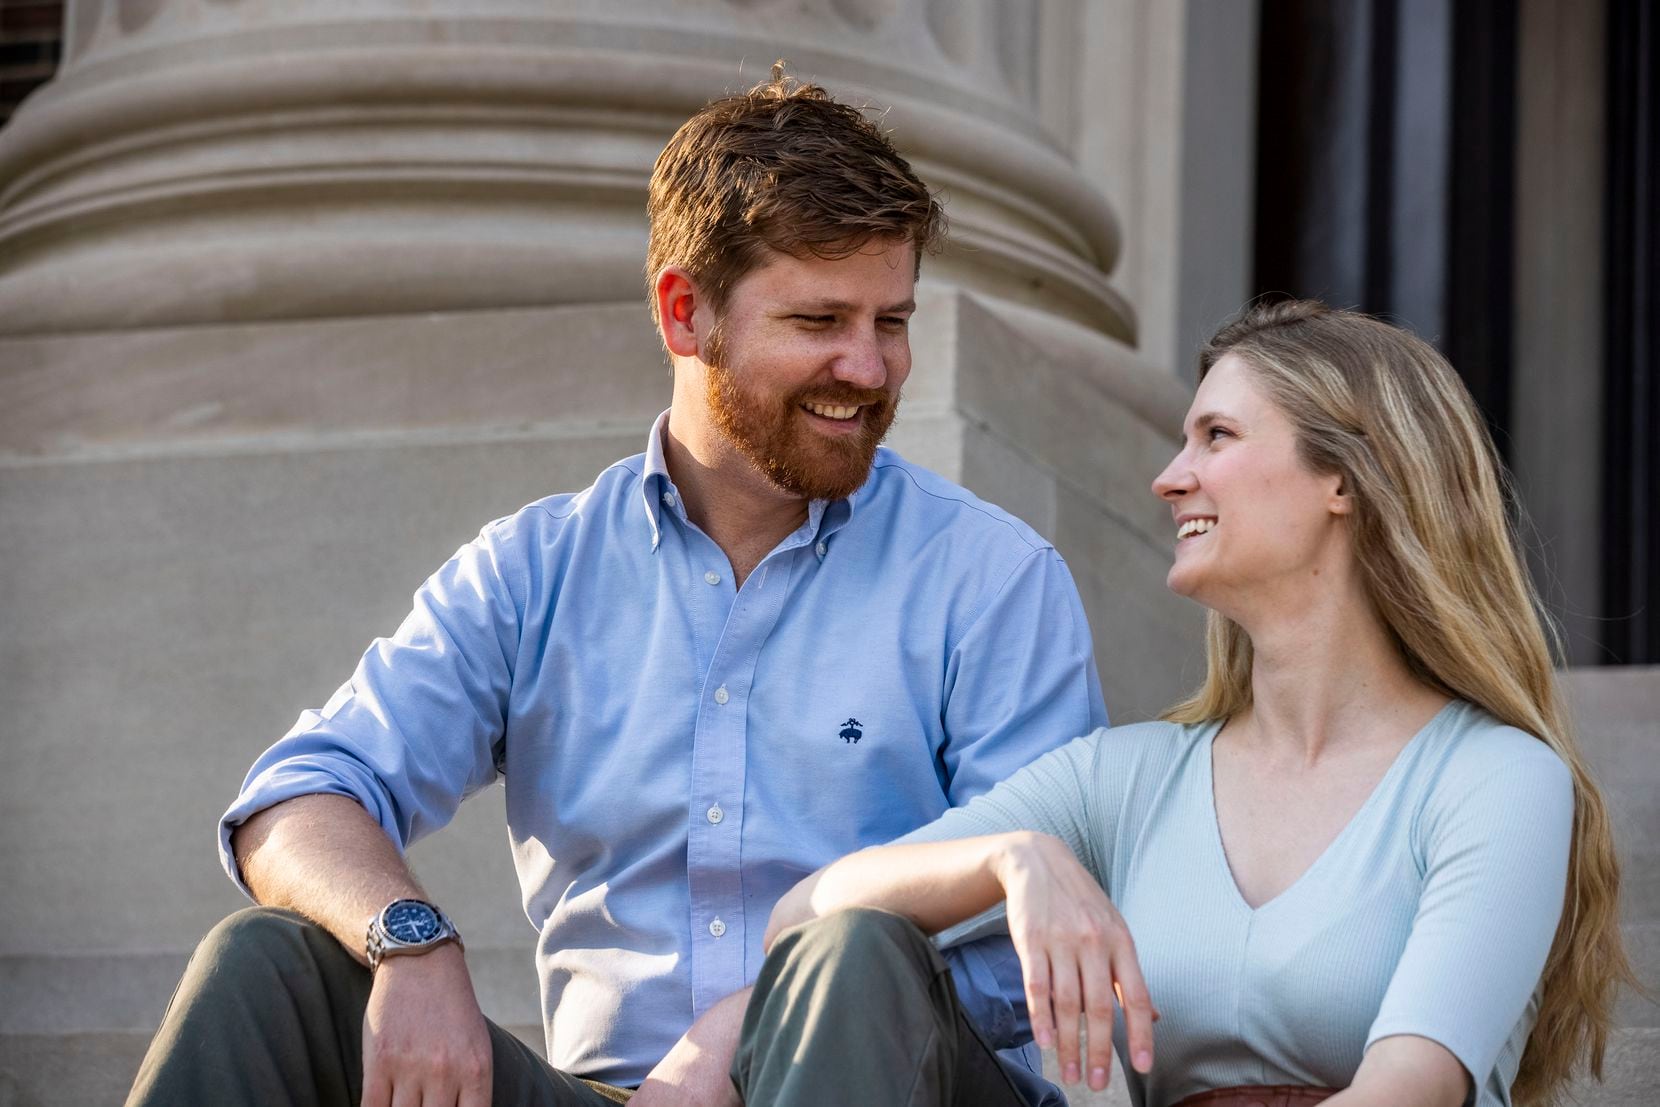  James McCormick and Lauren Ammerman met during their doctoral programs at Southern Methodist University while conducting research around a protein related to Alzheimer's disease. A romance blossomed, and now the two plan to marry. (Lynda M. González/The Dallas Morning News)